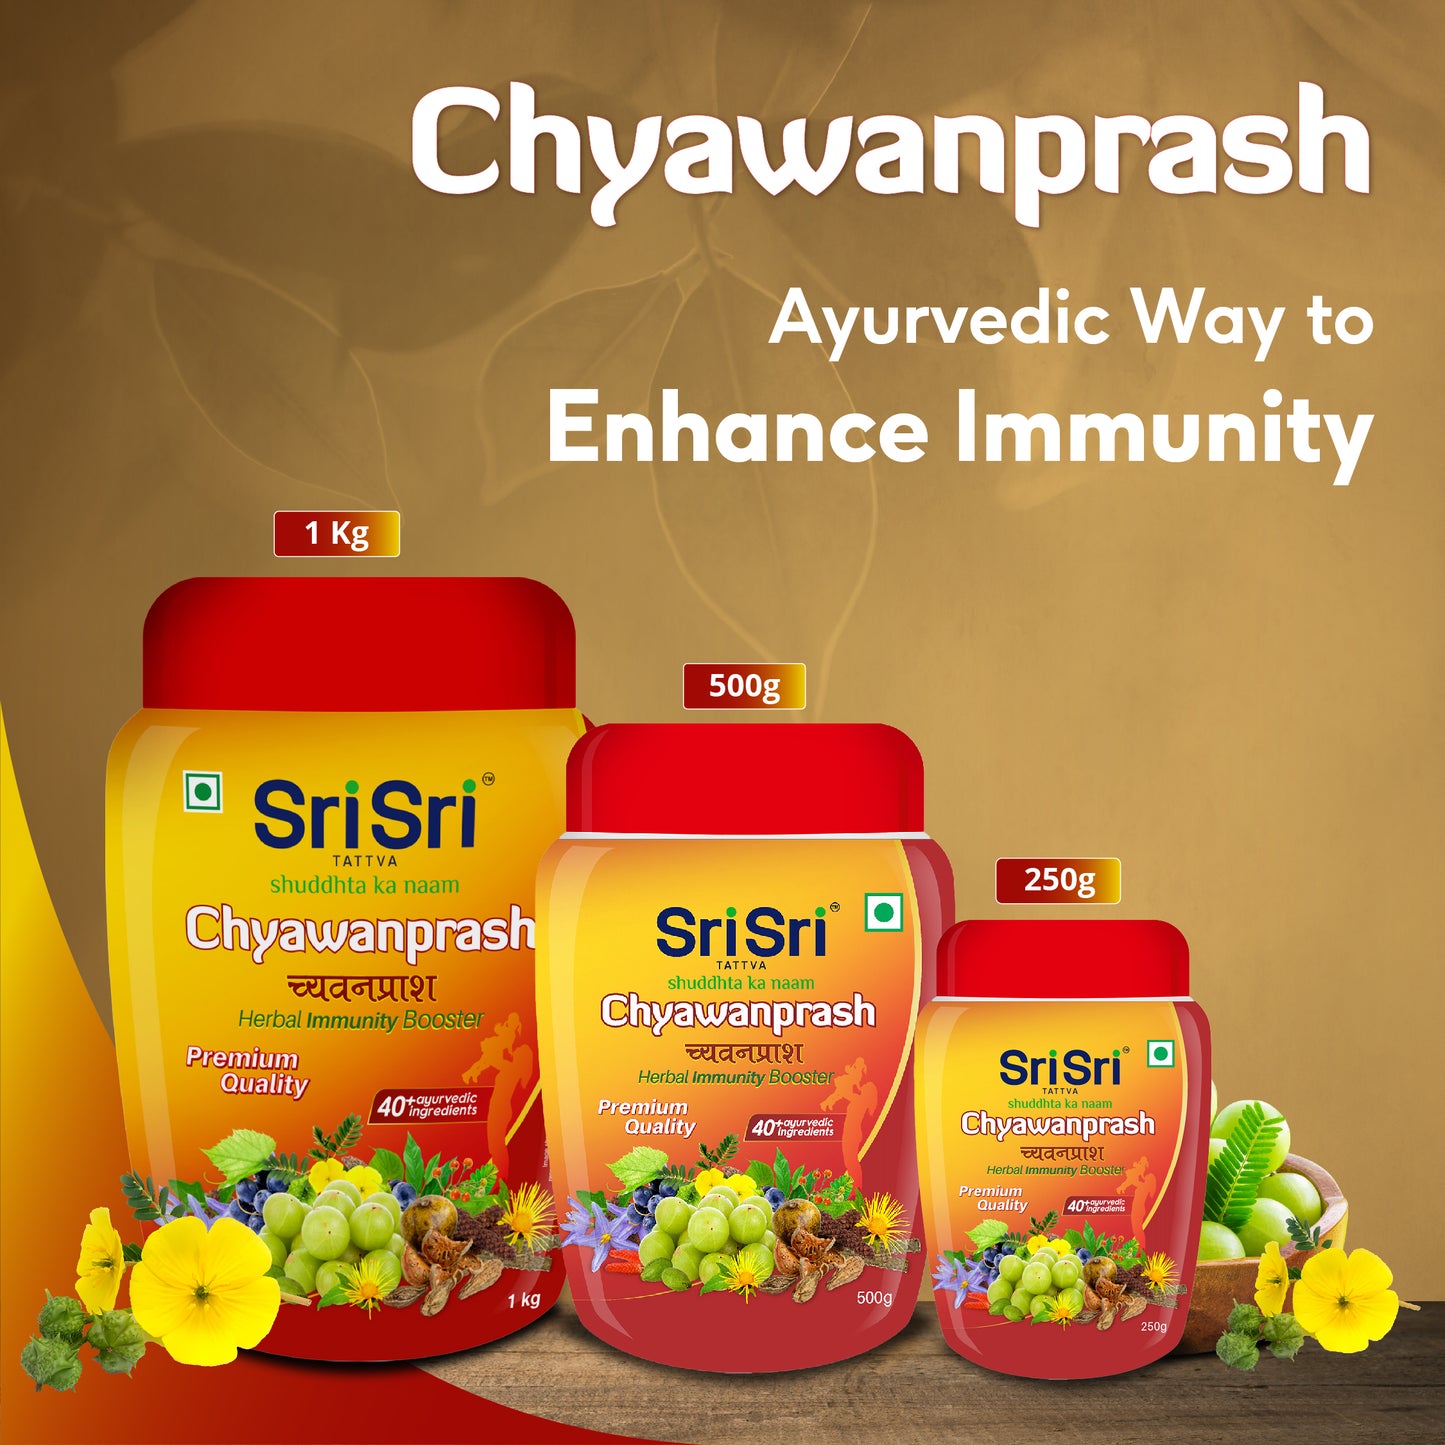 Chyawanprash - Herbal Immunity Booster with 40+ Ayurvedic Ingredients for Better Strength and Stamina, 500 g